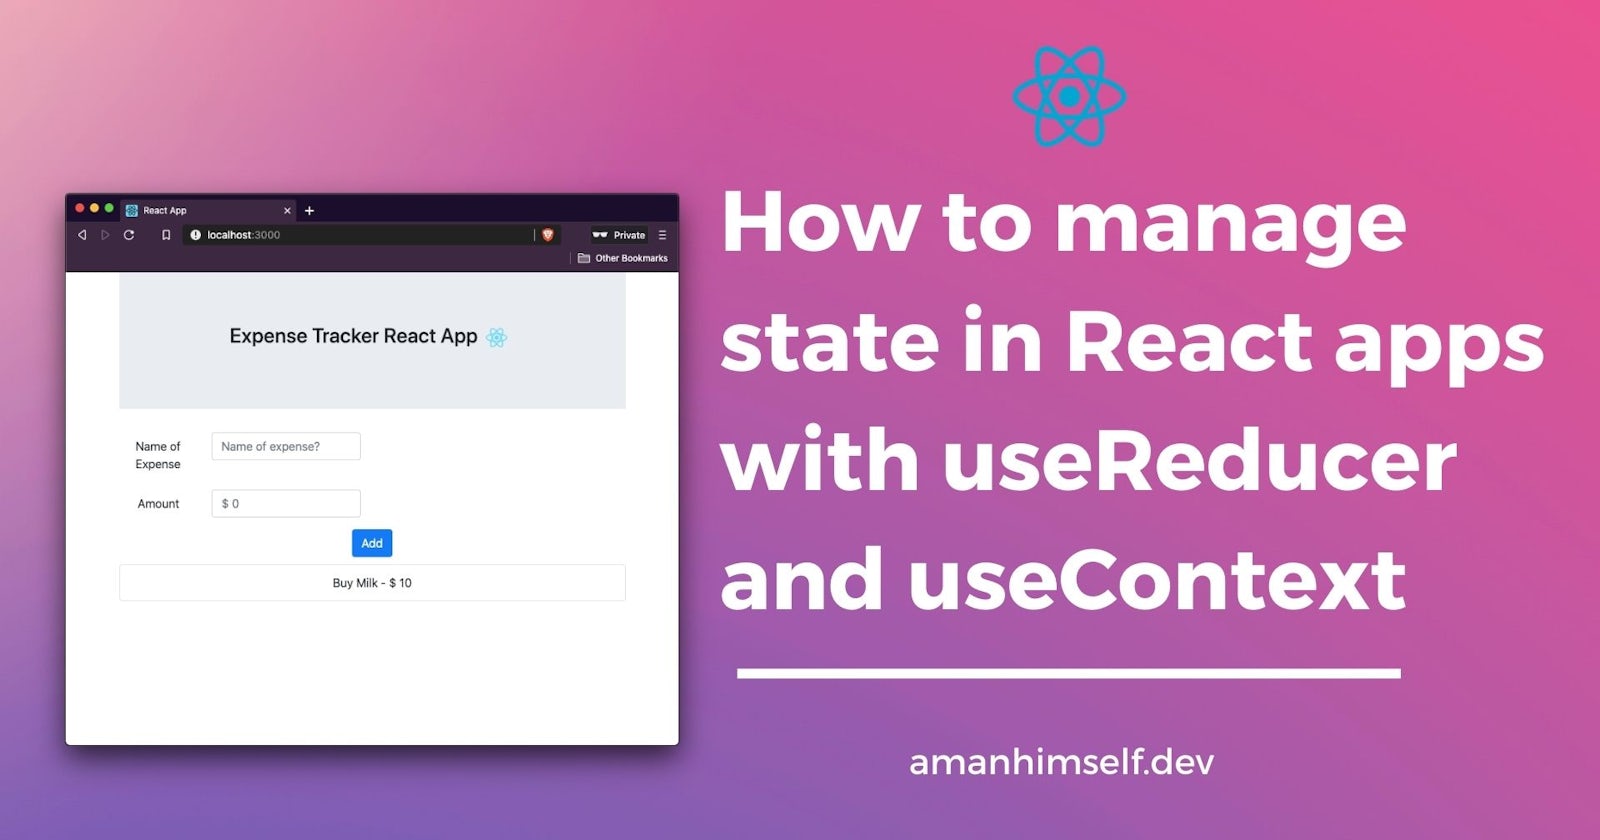 How to manage state in React apps with useReducer and useContext hooks